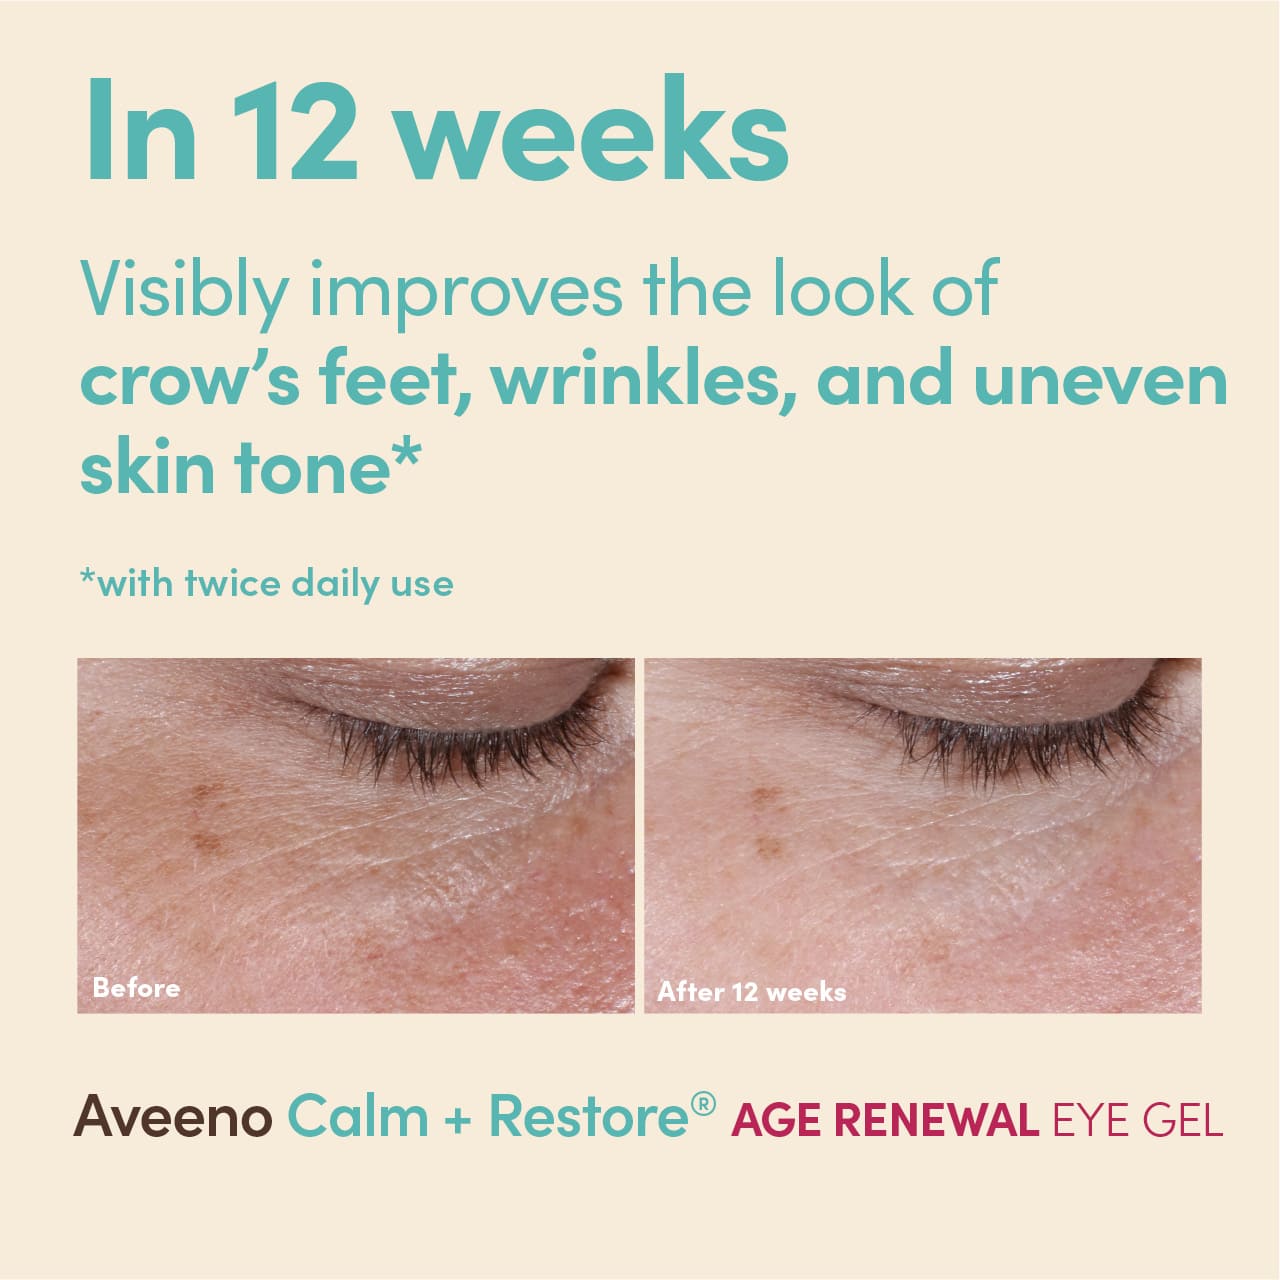 Before and after pictures of under eye area after the use of AVEENO® eye gel with a claim ‘visibly improves the look of crow’s feet, wrinkles, and uneven skin tone in 12 weeks’